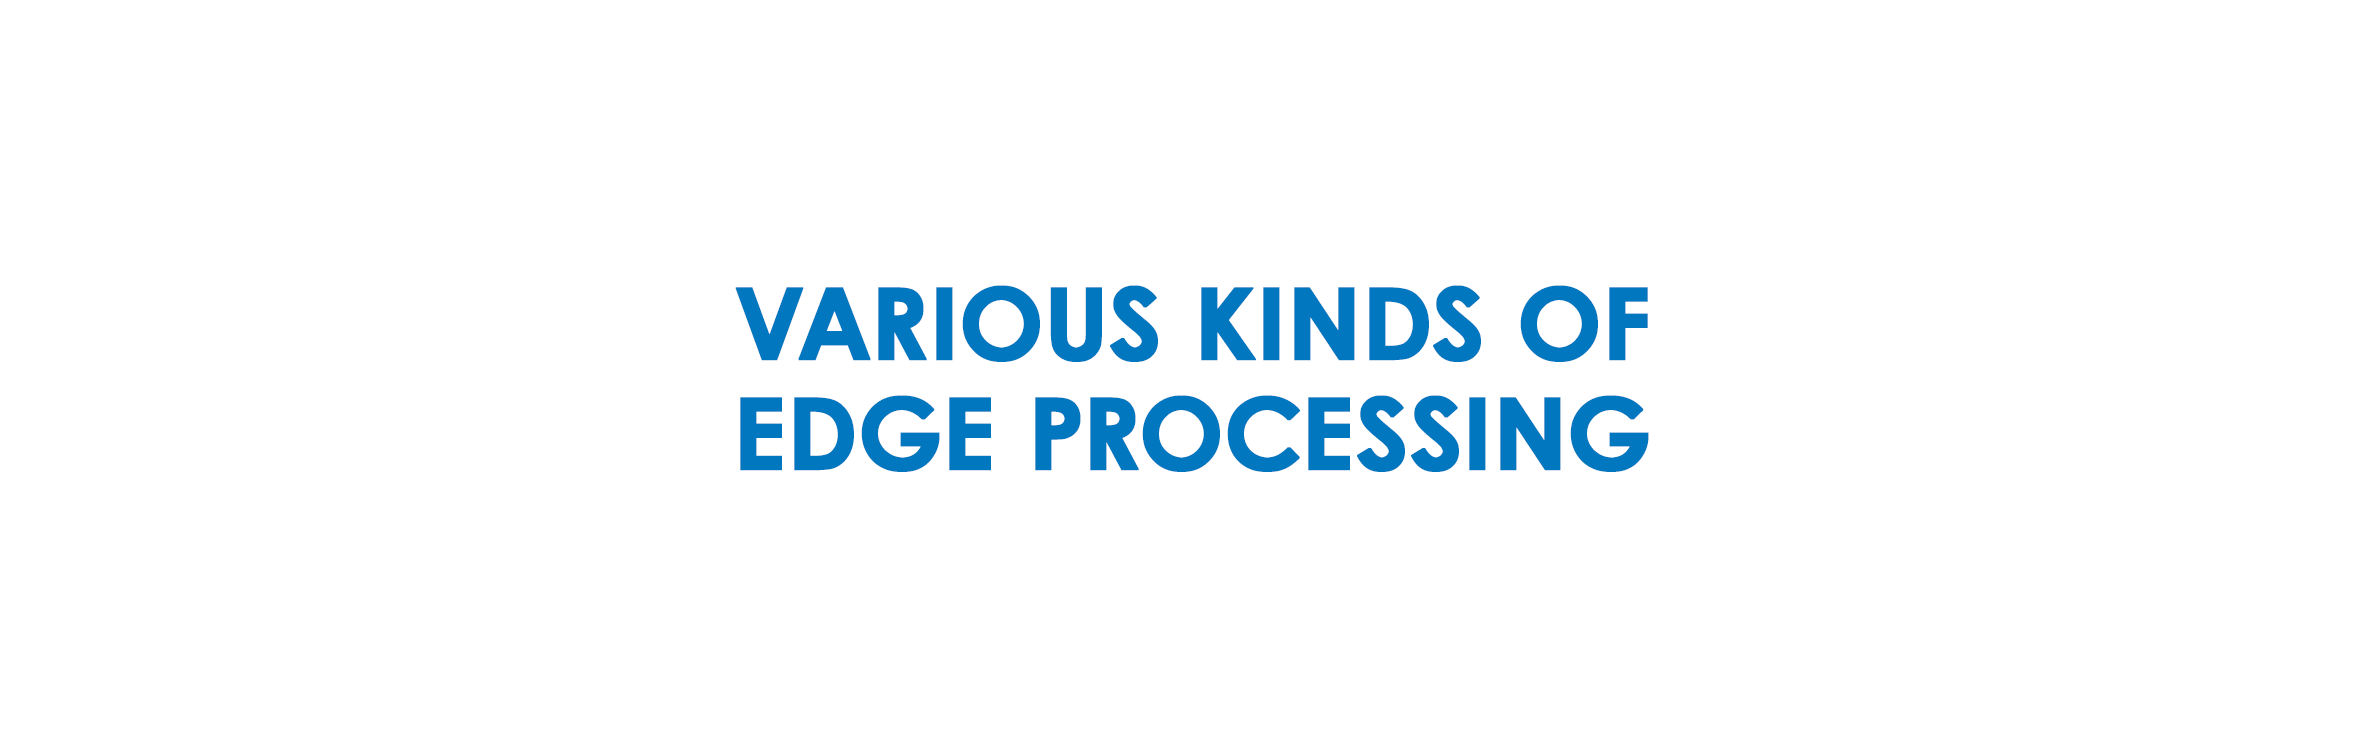 VARIOUS KINDS OF EDGE PROCESSING